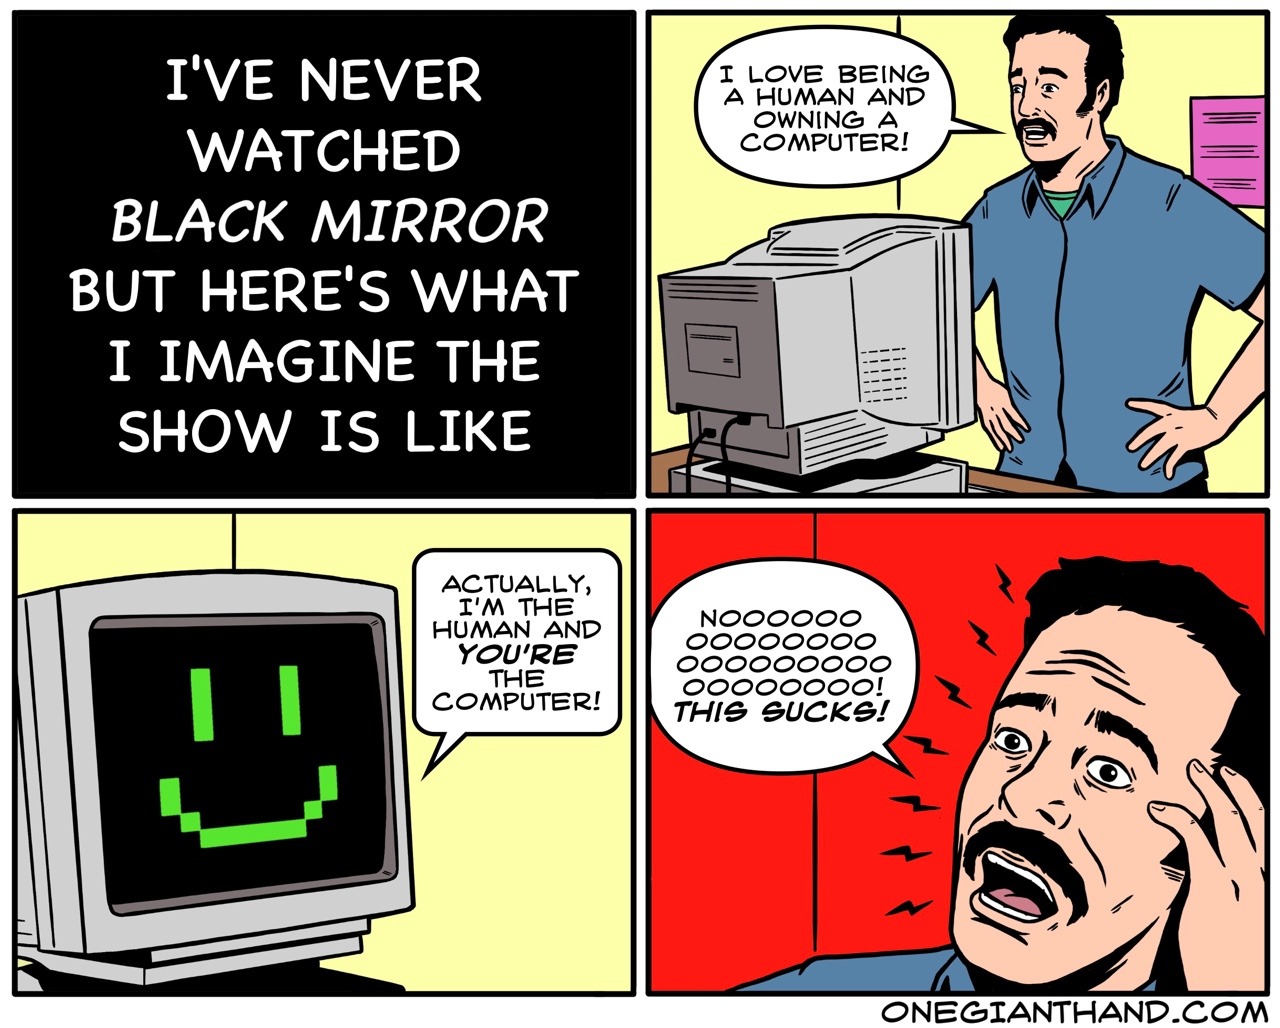 onegianthand:I’ve never watched Black Mirror but here’s what I imagine the show